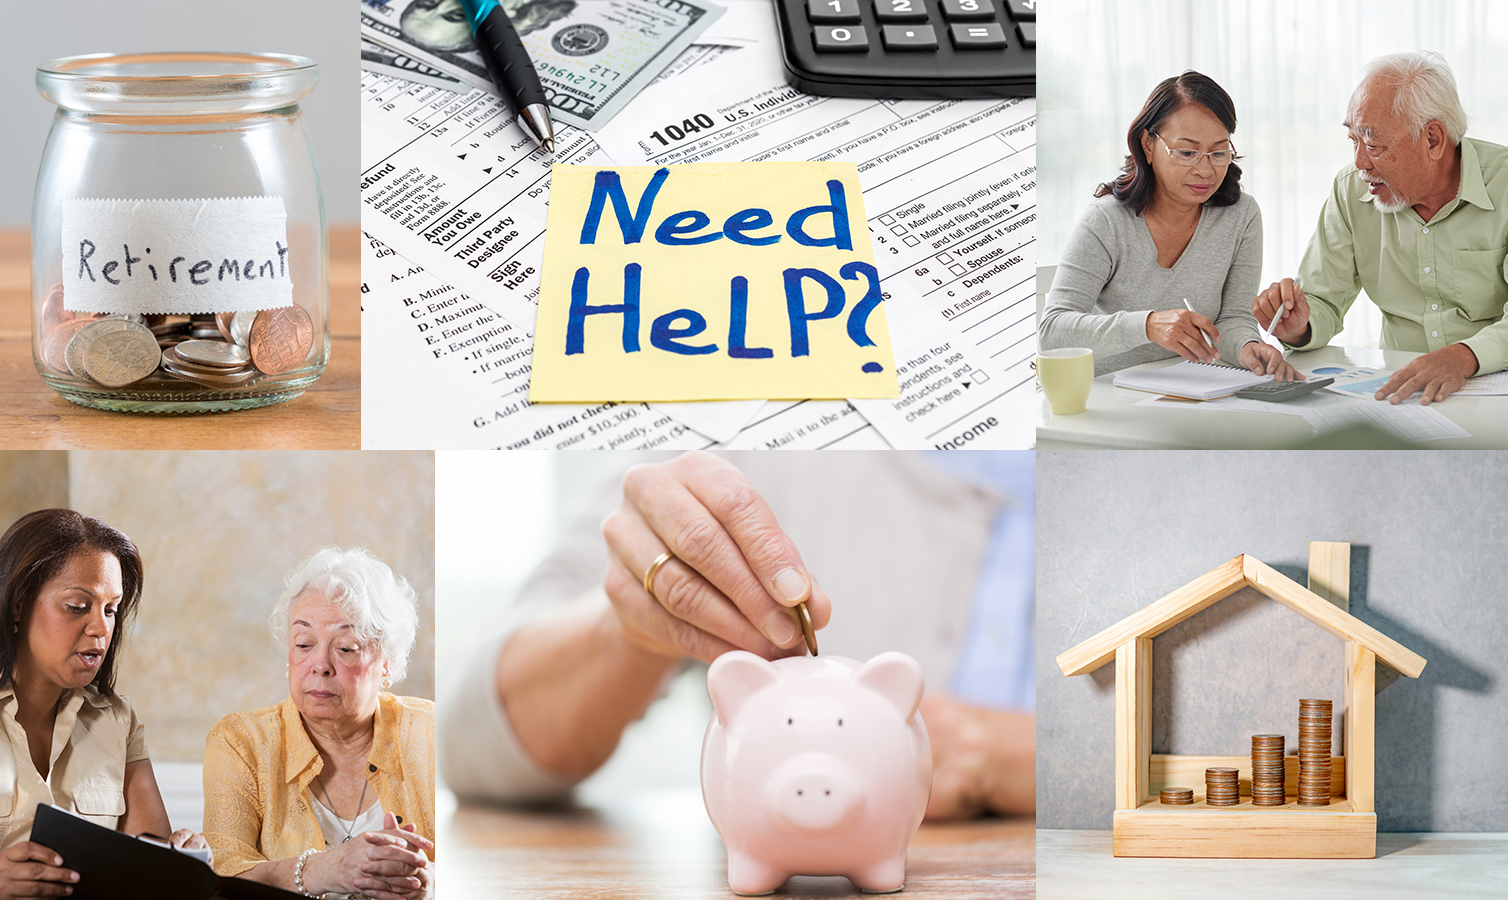 collage of photos regarding money, saving, planning, and asking for help